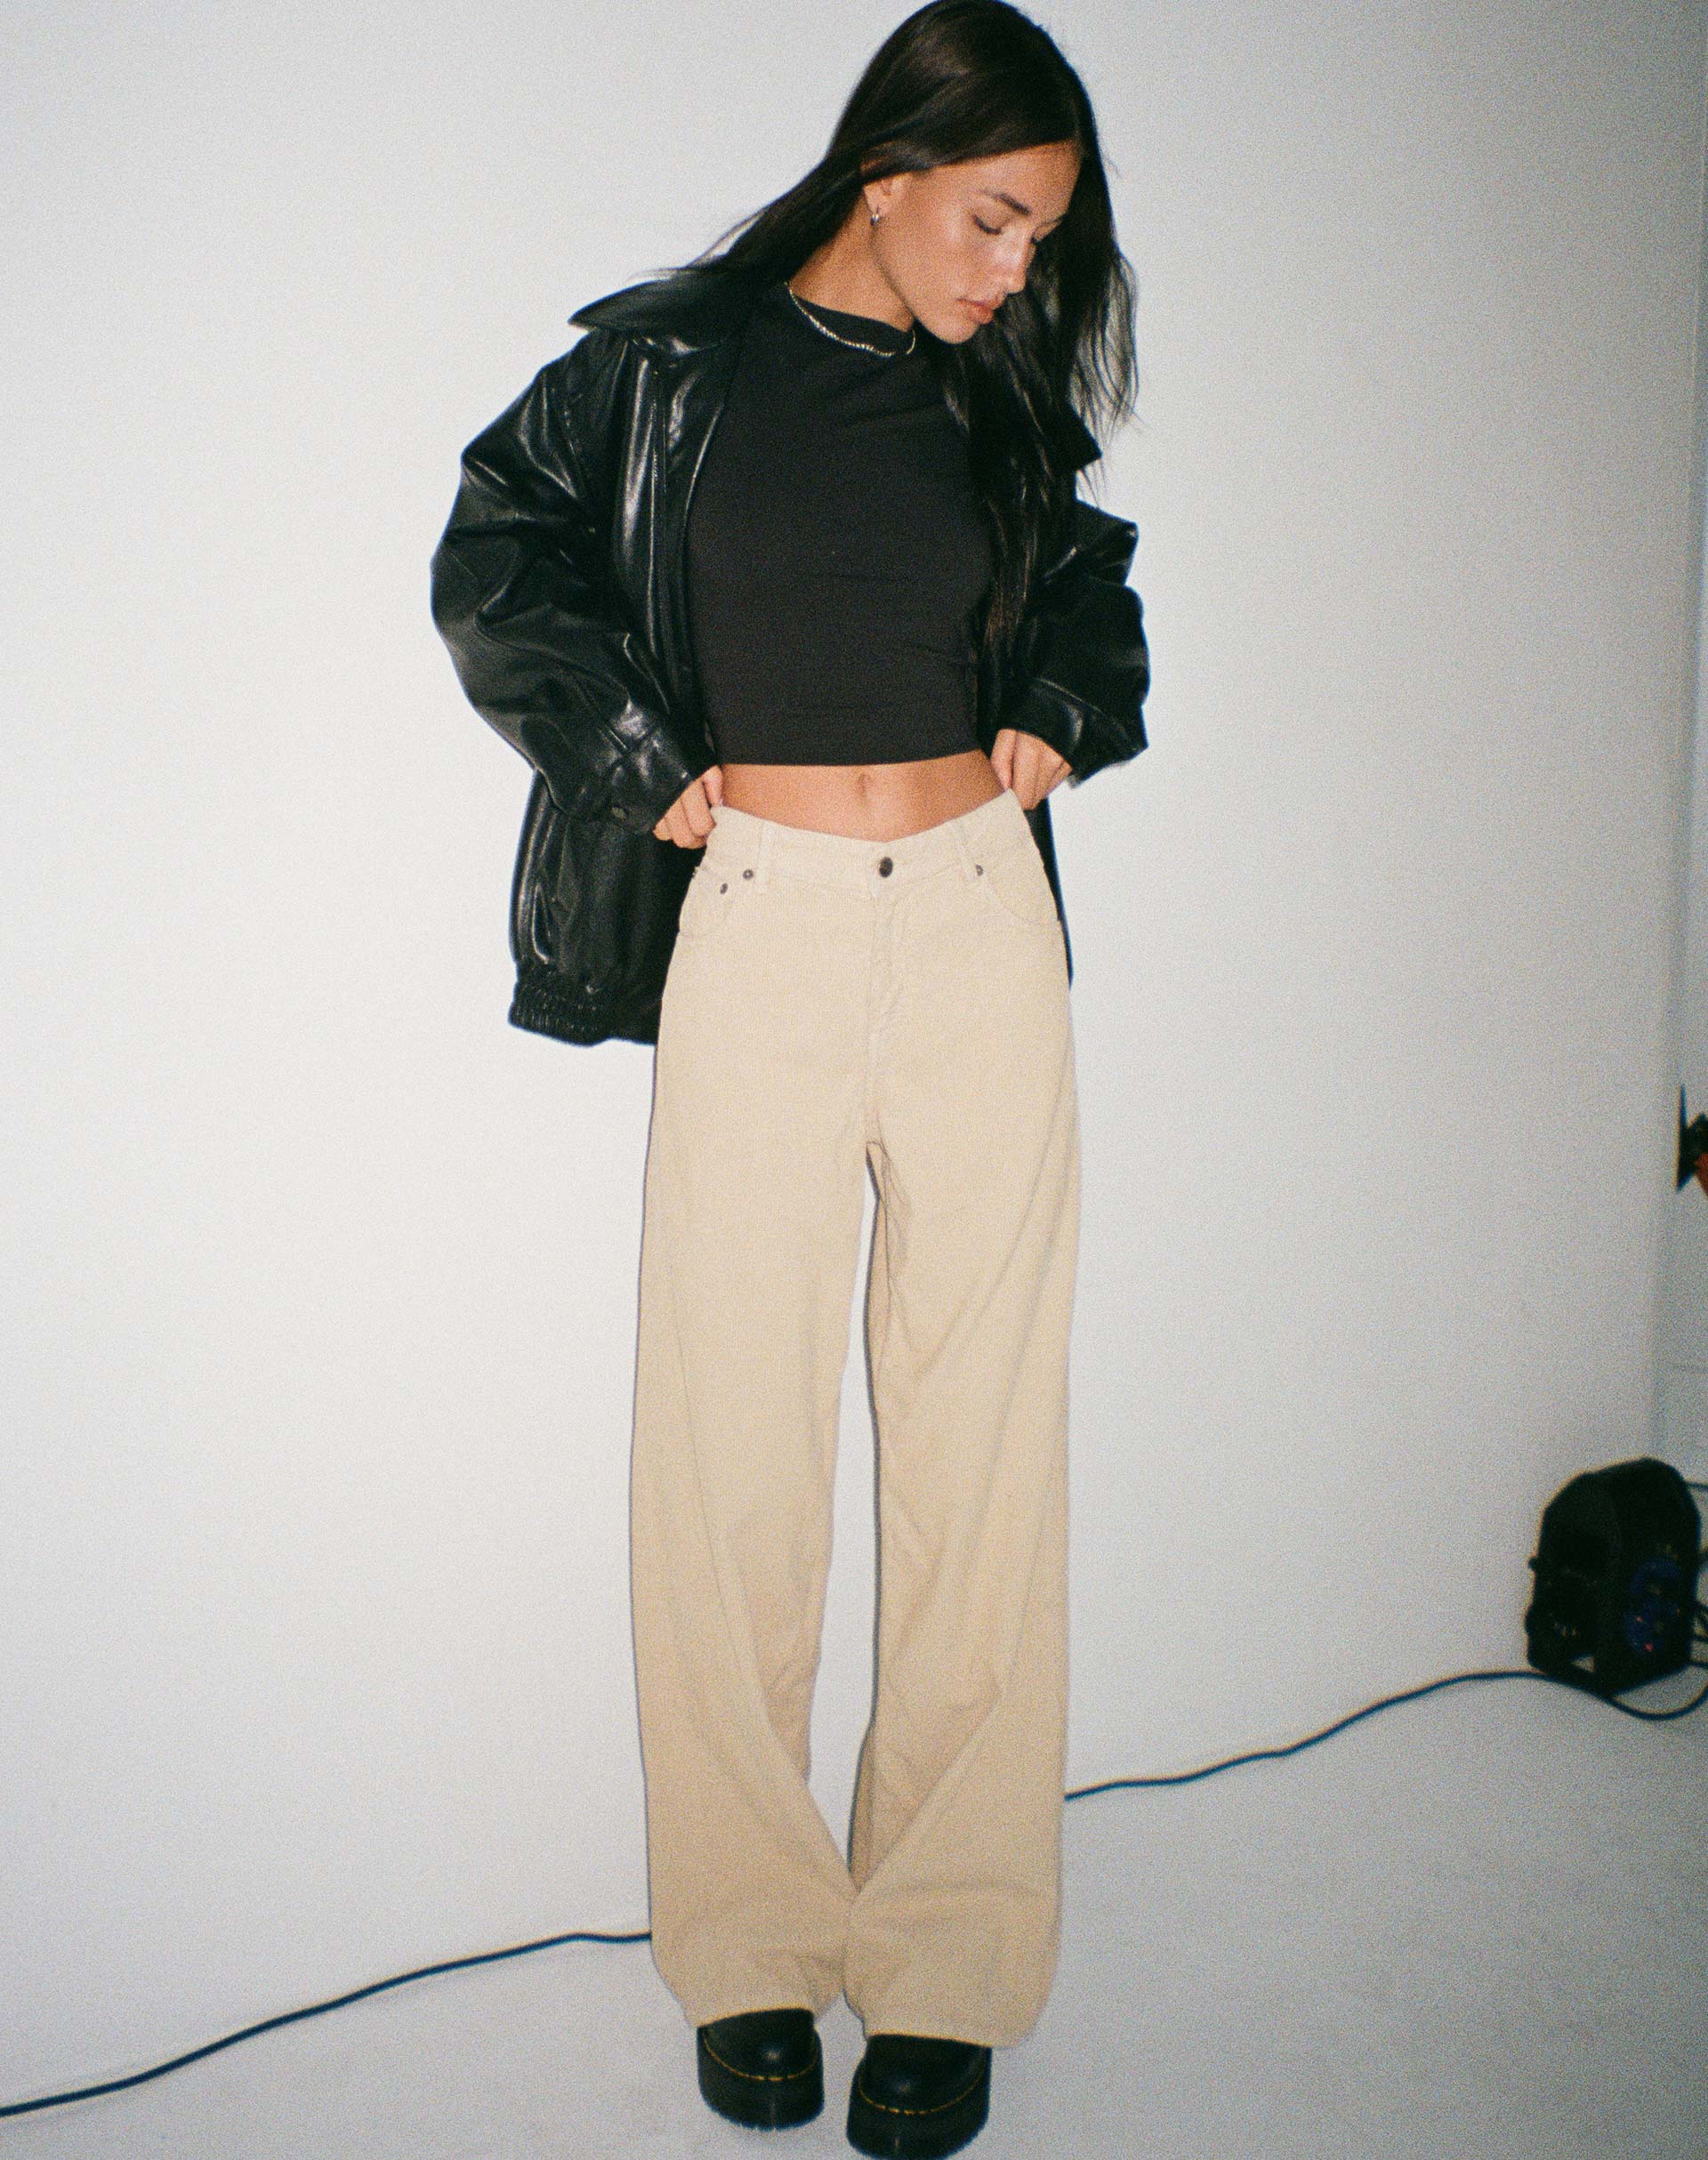 Image of Roomy Extra Wide Jeans in Cord Light Tan